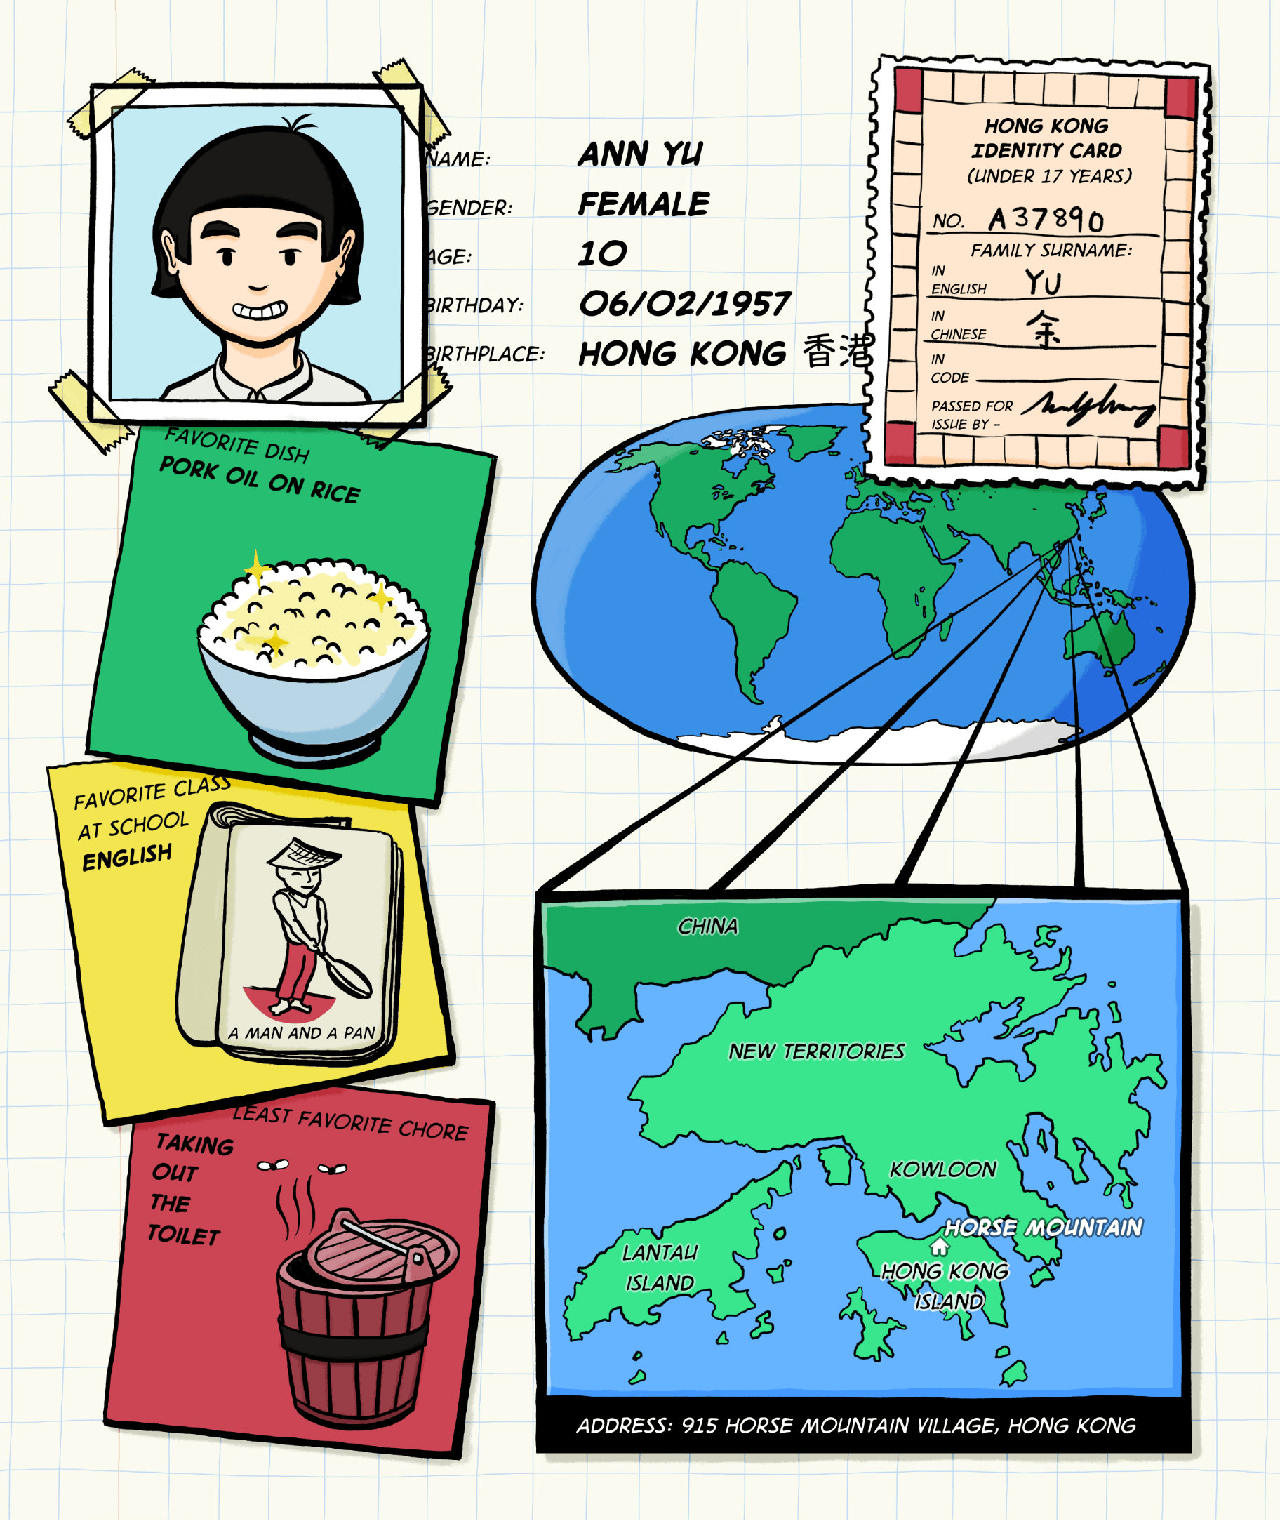 A collage-like image detailing a student's favorite food, favorite subject in school, least favorite chore, and where she's from